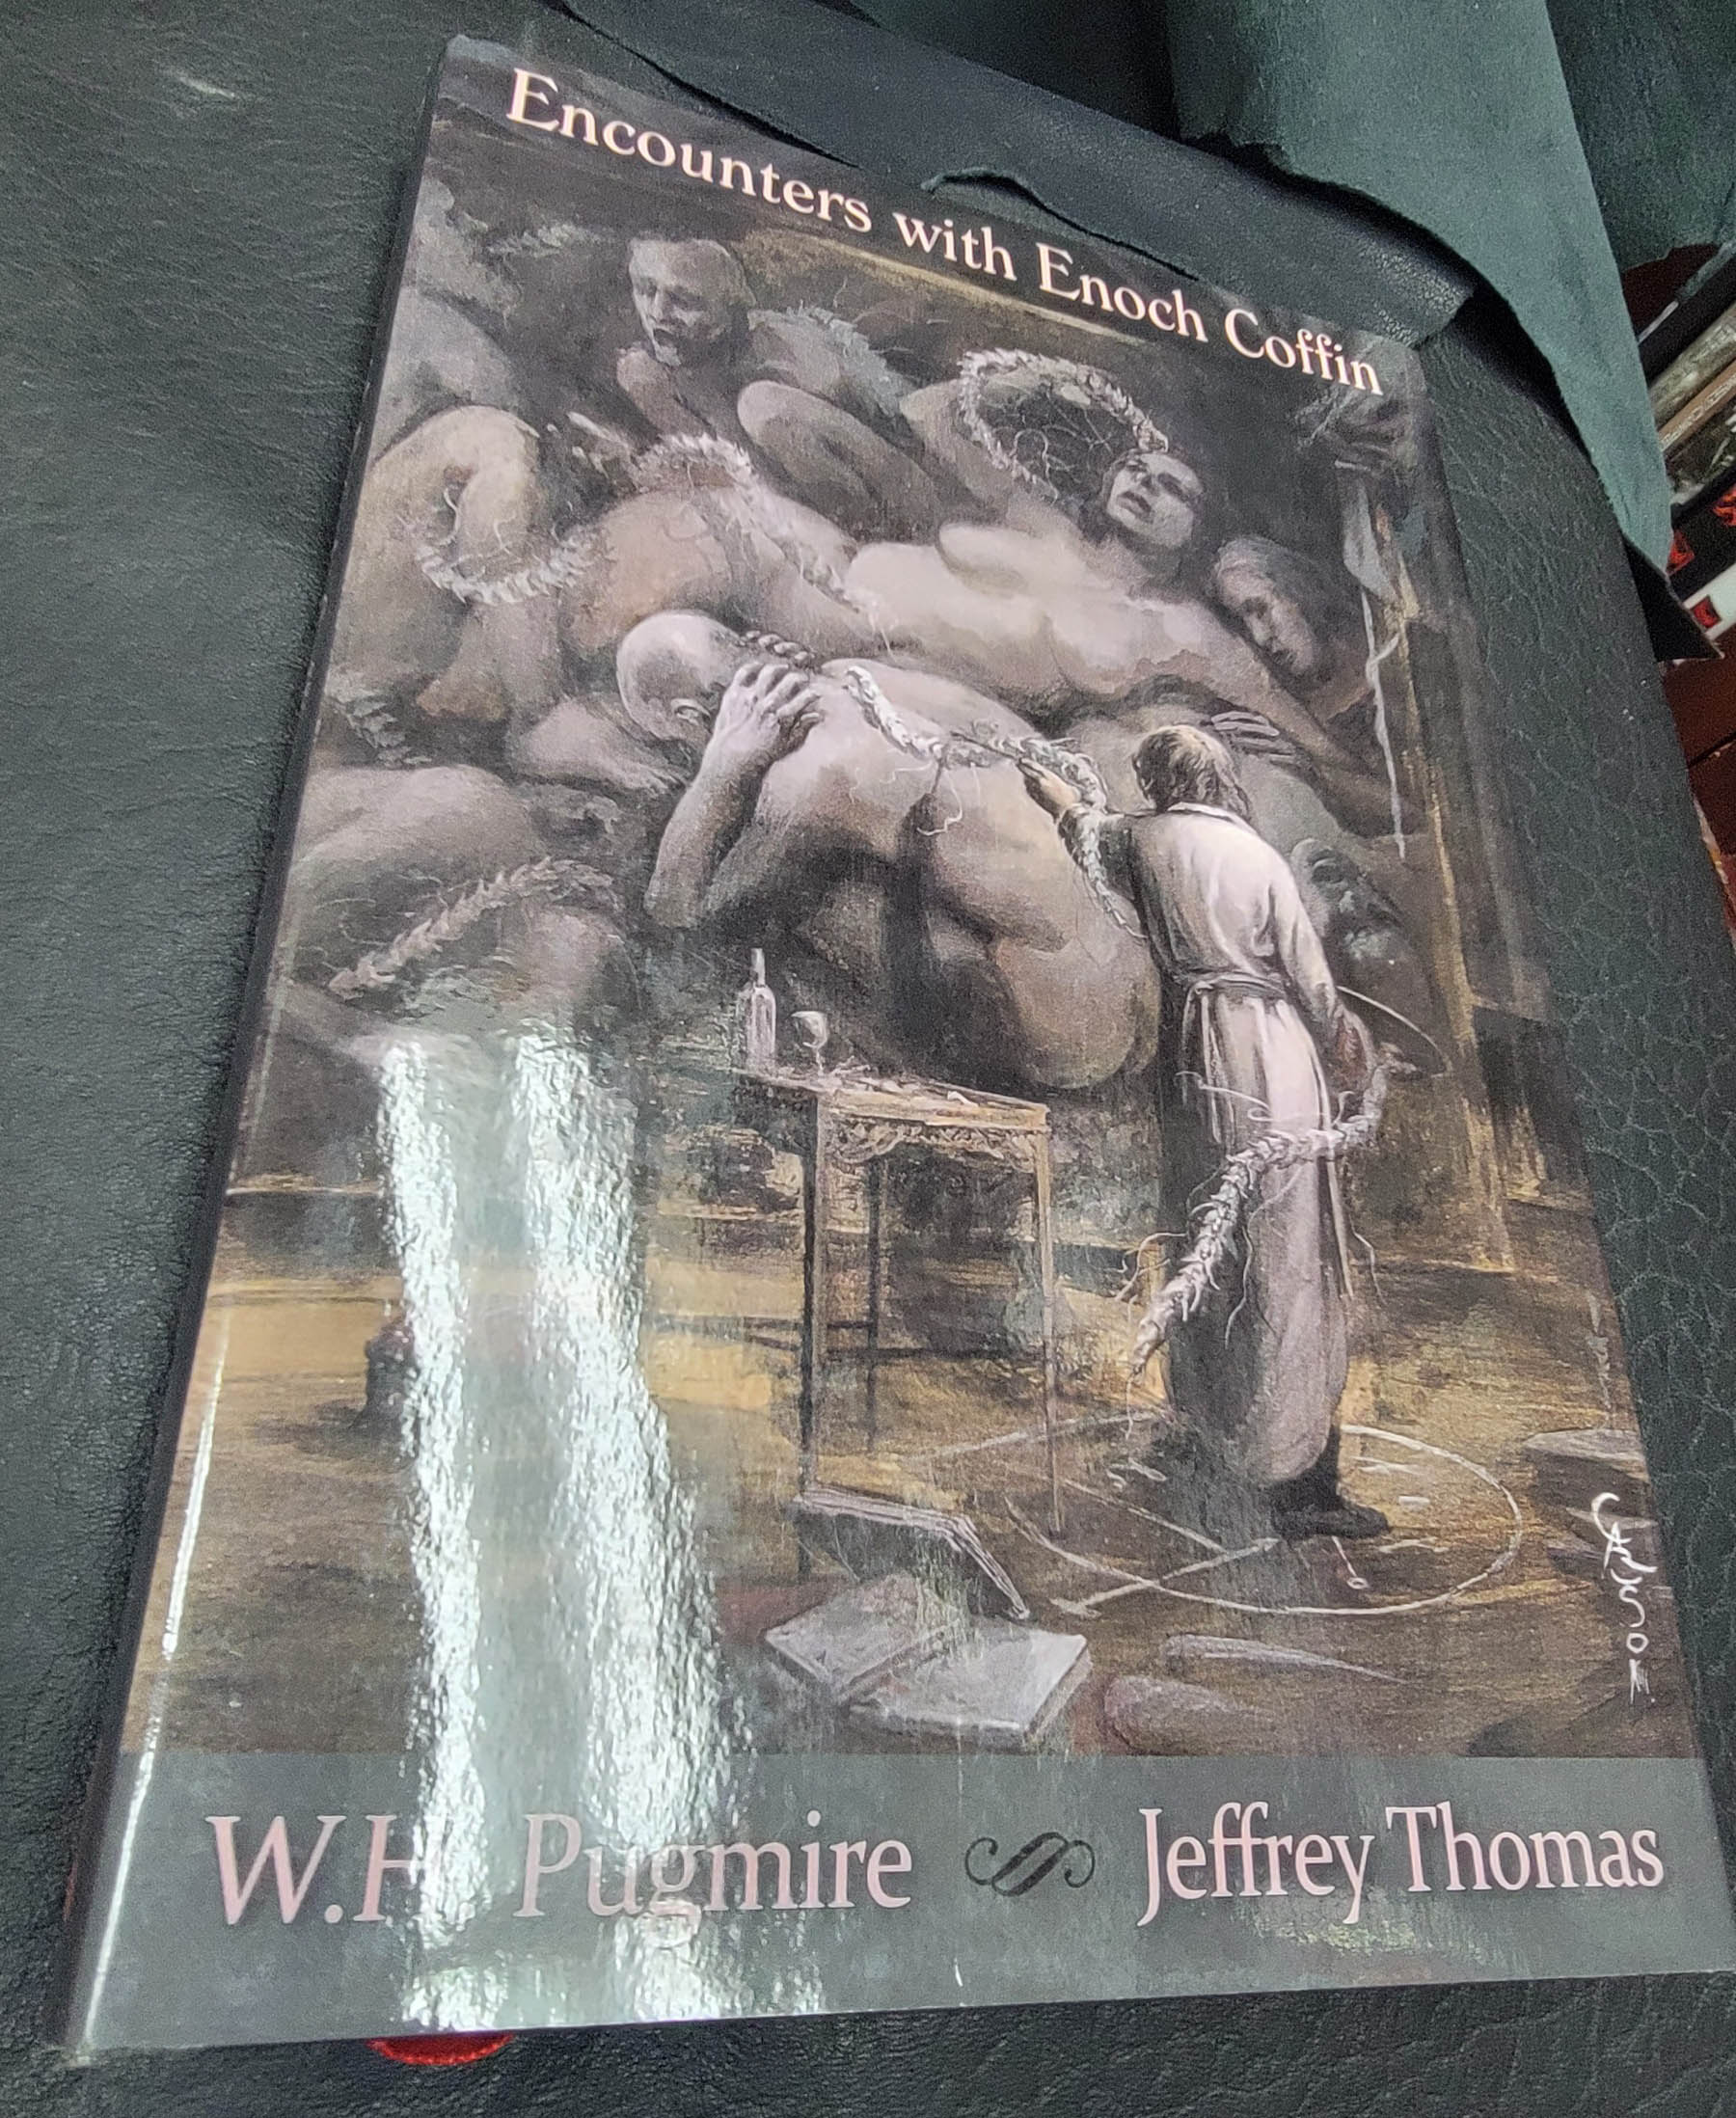 Encounters with Enoch Coffin by W.H. Pugmire and Jeffrey Thomas Signed Limited PC Hardcover